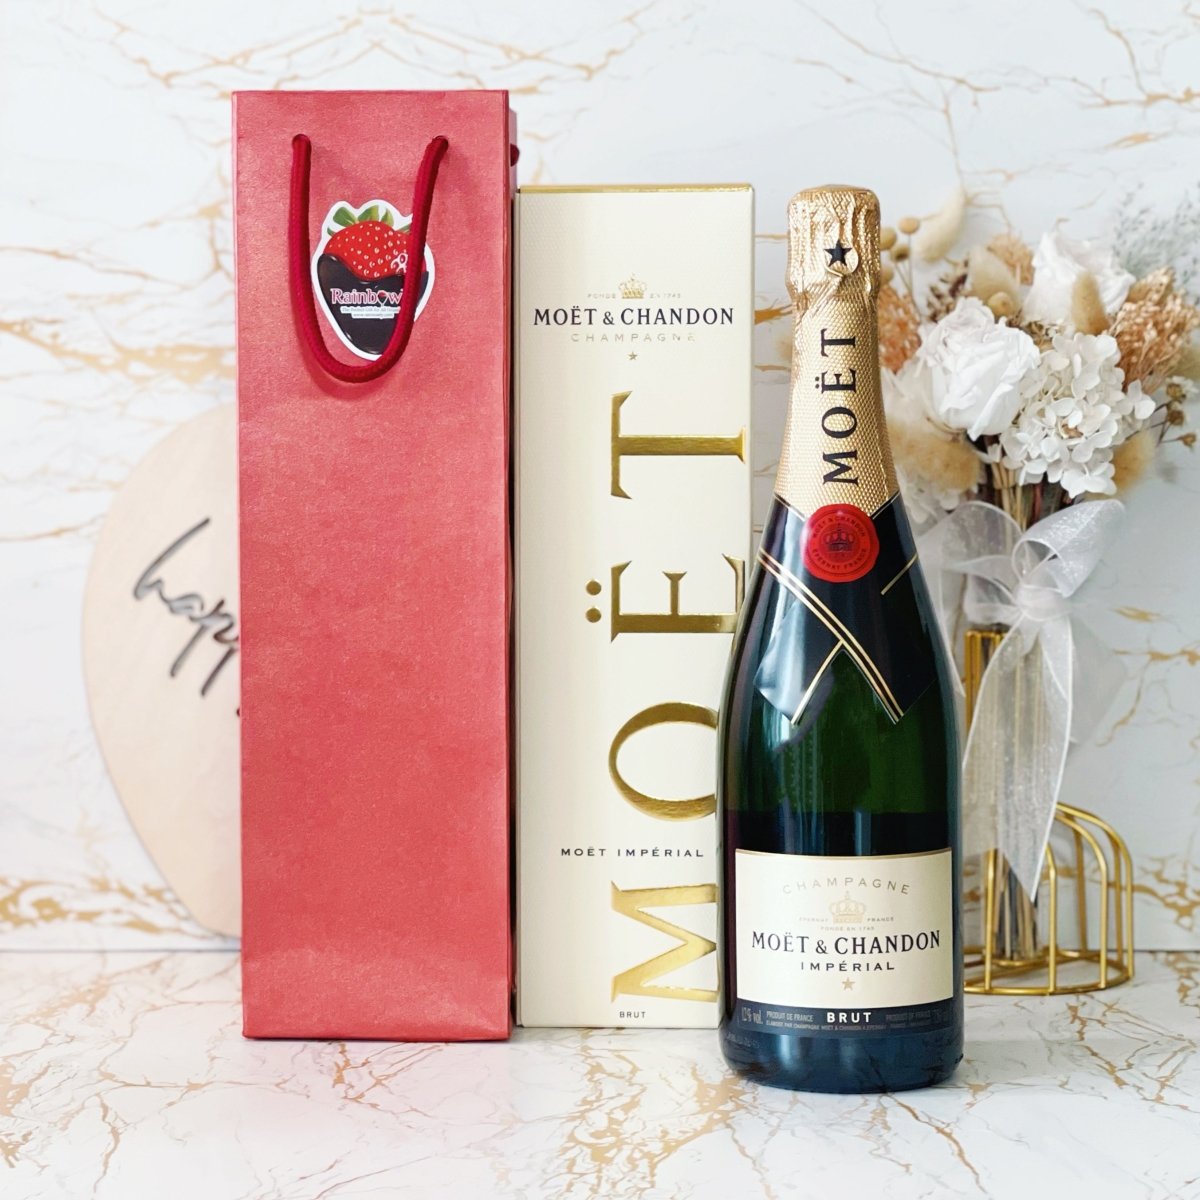 Moet & Chandon Champagne - Brut Imperial 750ml (With Box and Wine Bag) - Rainbowly Fresh Fruit Gift and Flower Arrangments